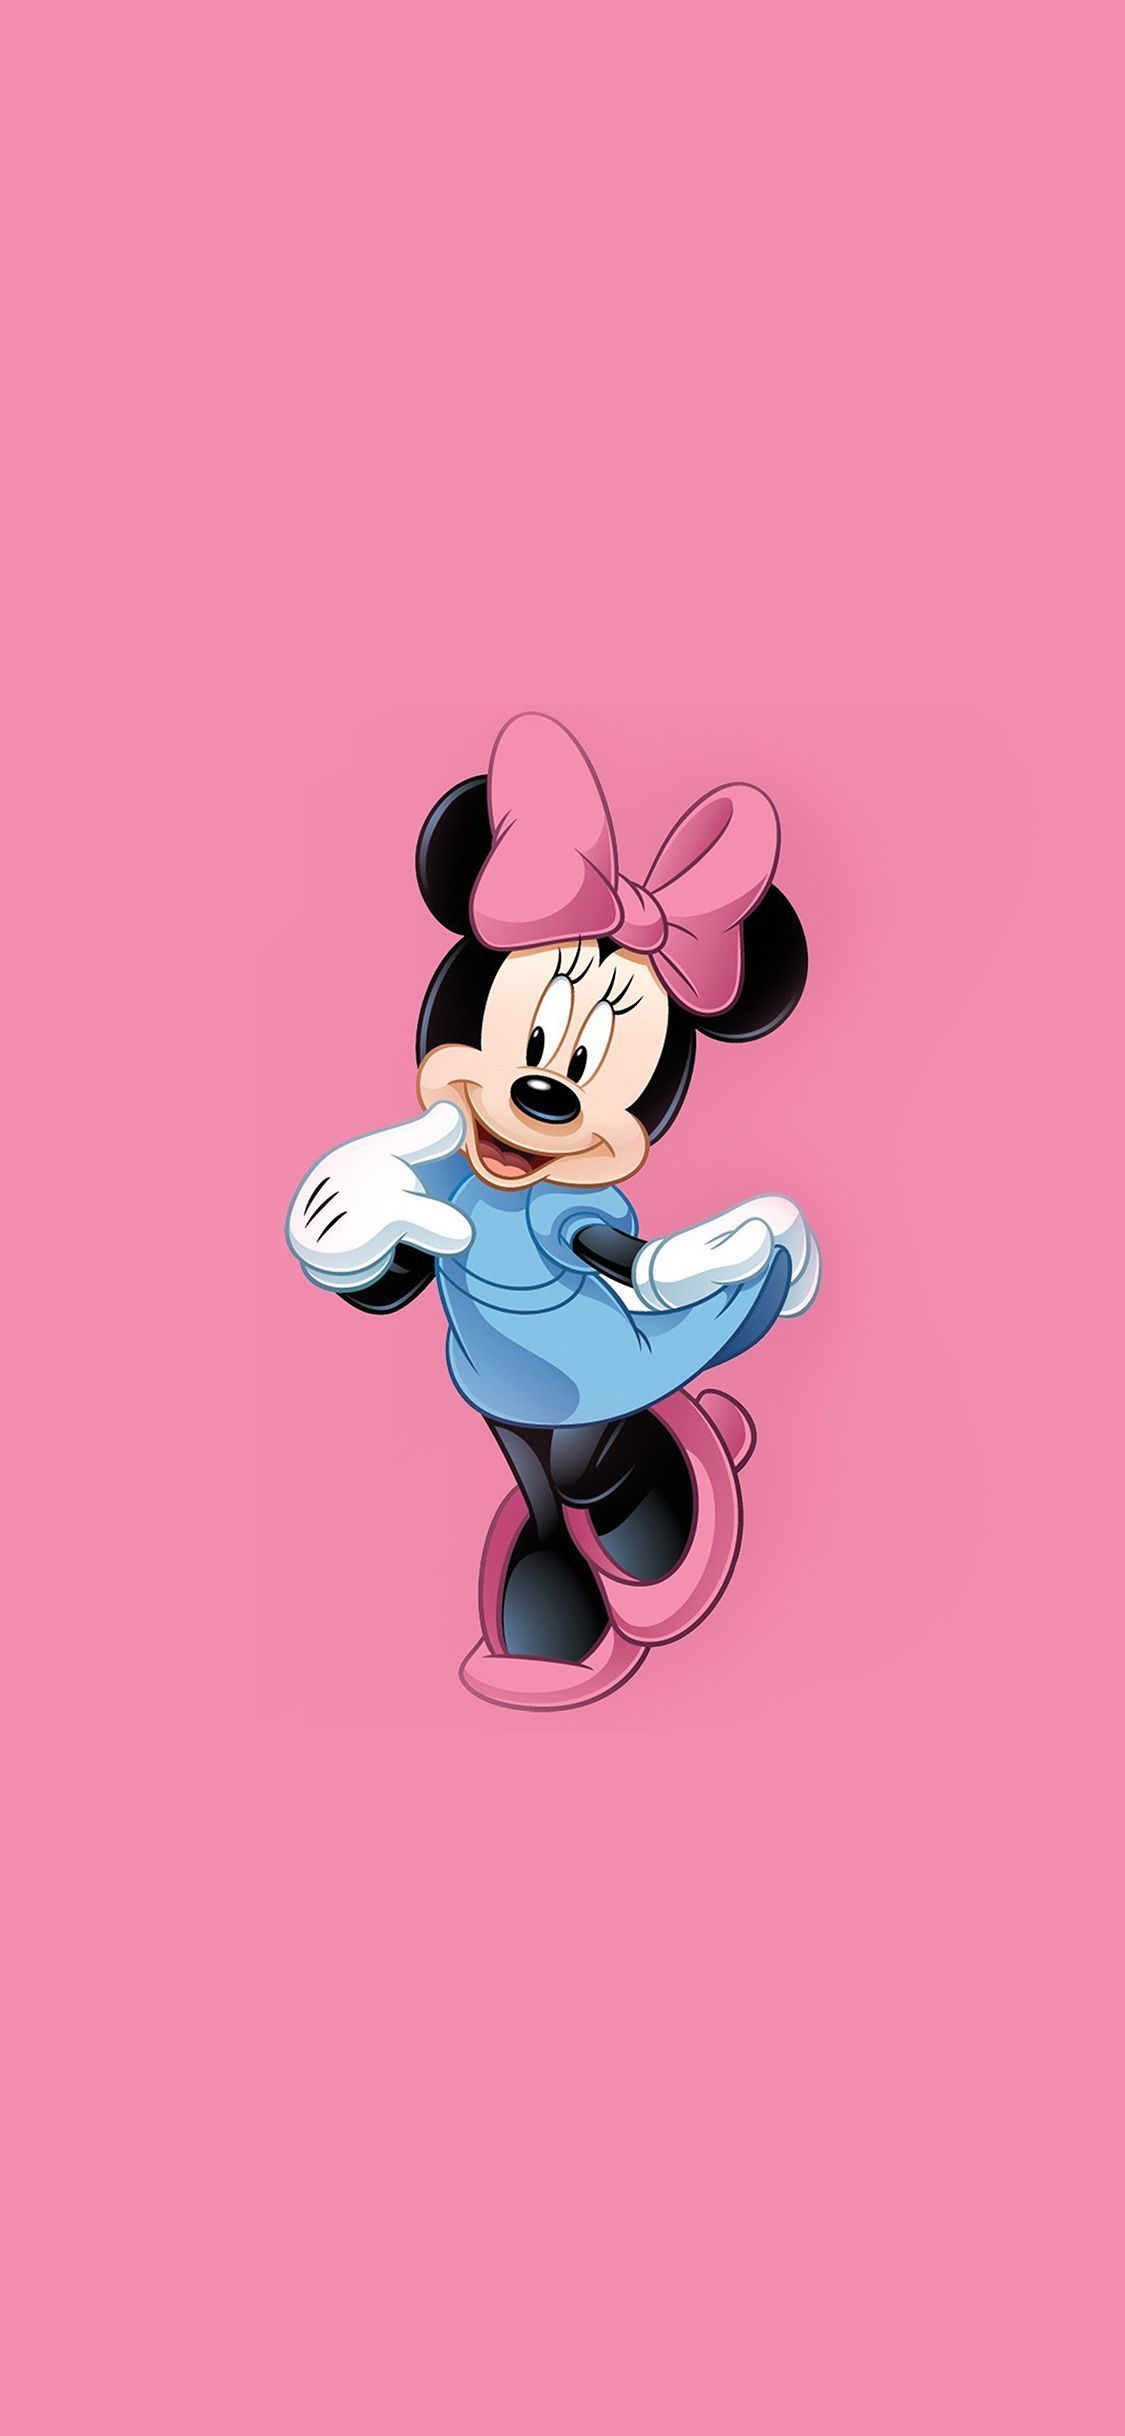 Minnie Mouse iPhone Wallpaper with high-resolution 1080x1920 pixel. You can use this wallpaper for your iPhone 5, 6, 7, 8, X, XS, XR backgrounds, Mobile Screensaver, or iPad Lock Screen - Minnie Mouse